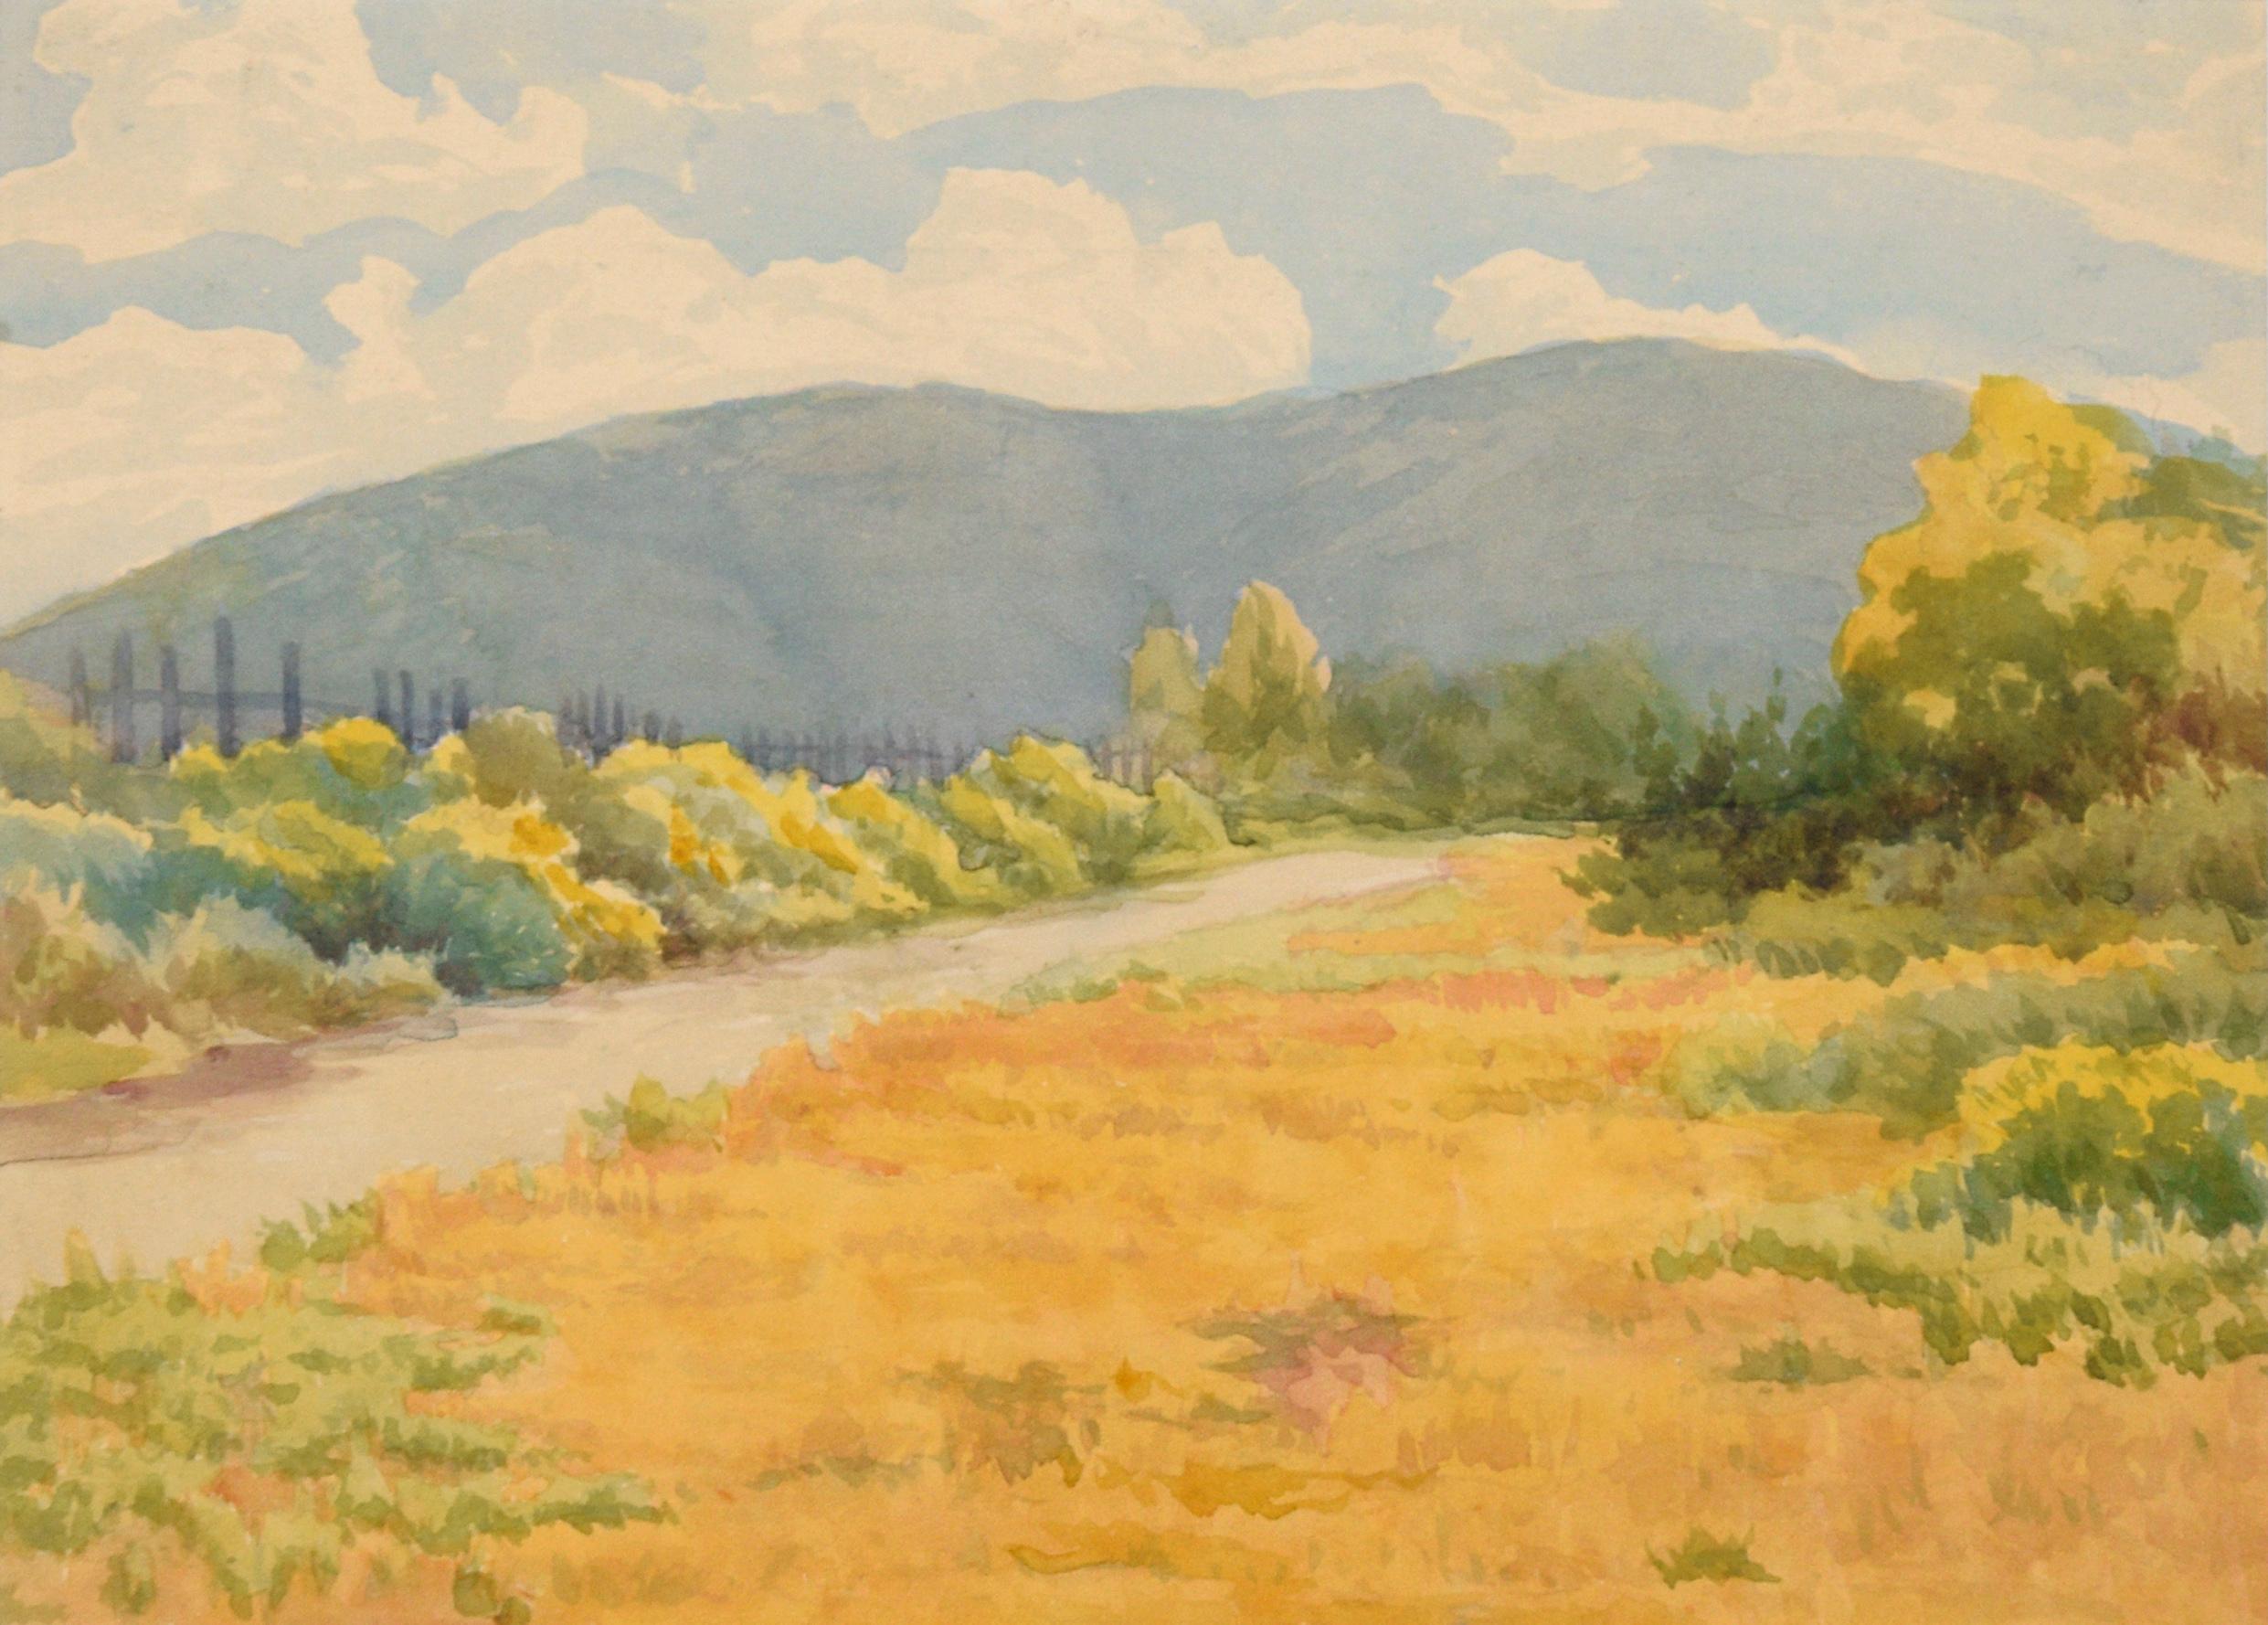 California Hills, Mid Century Landscape Watercolor  - Art by Unknown